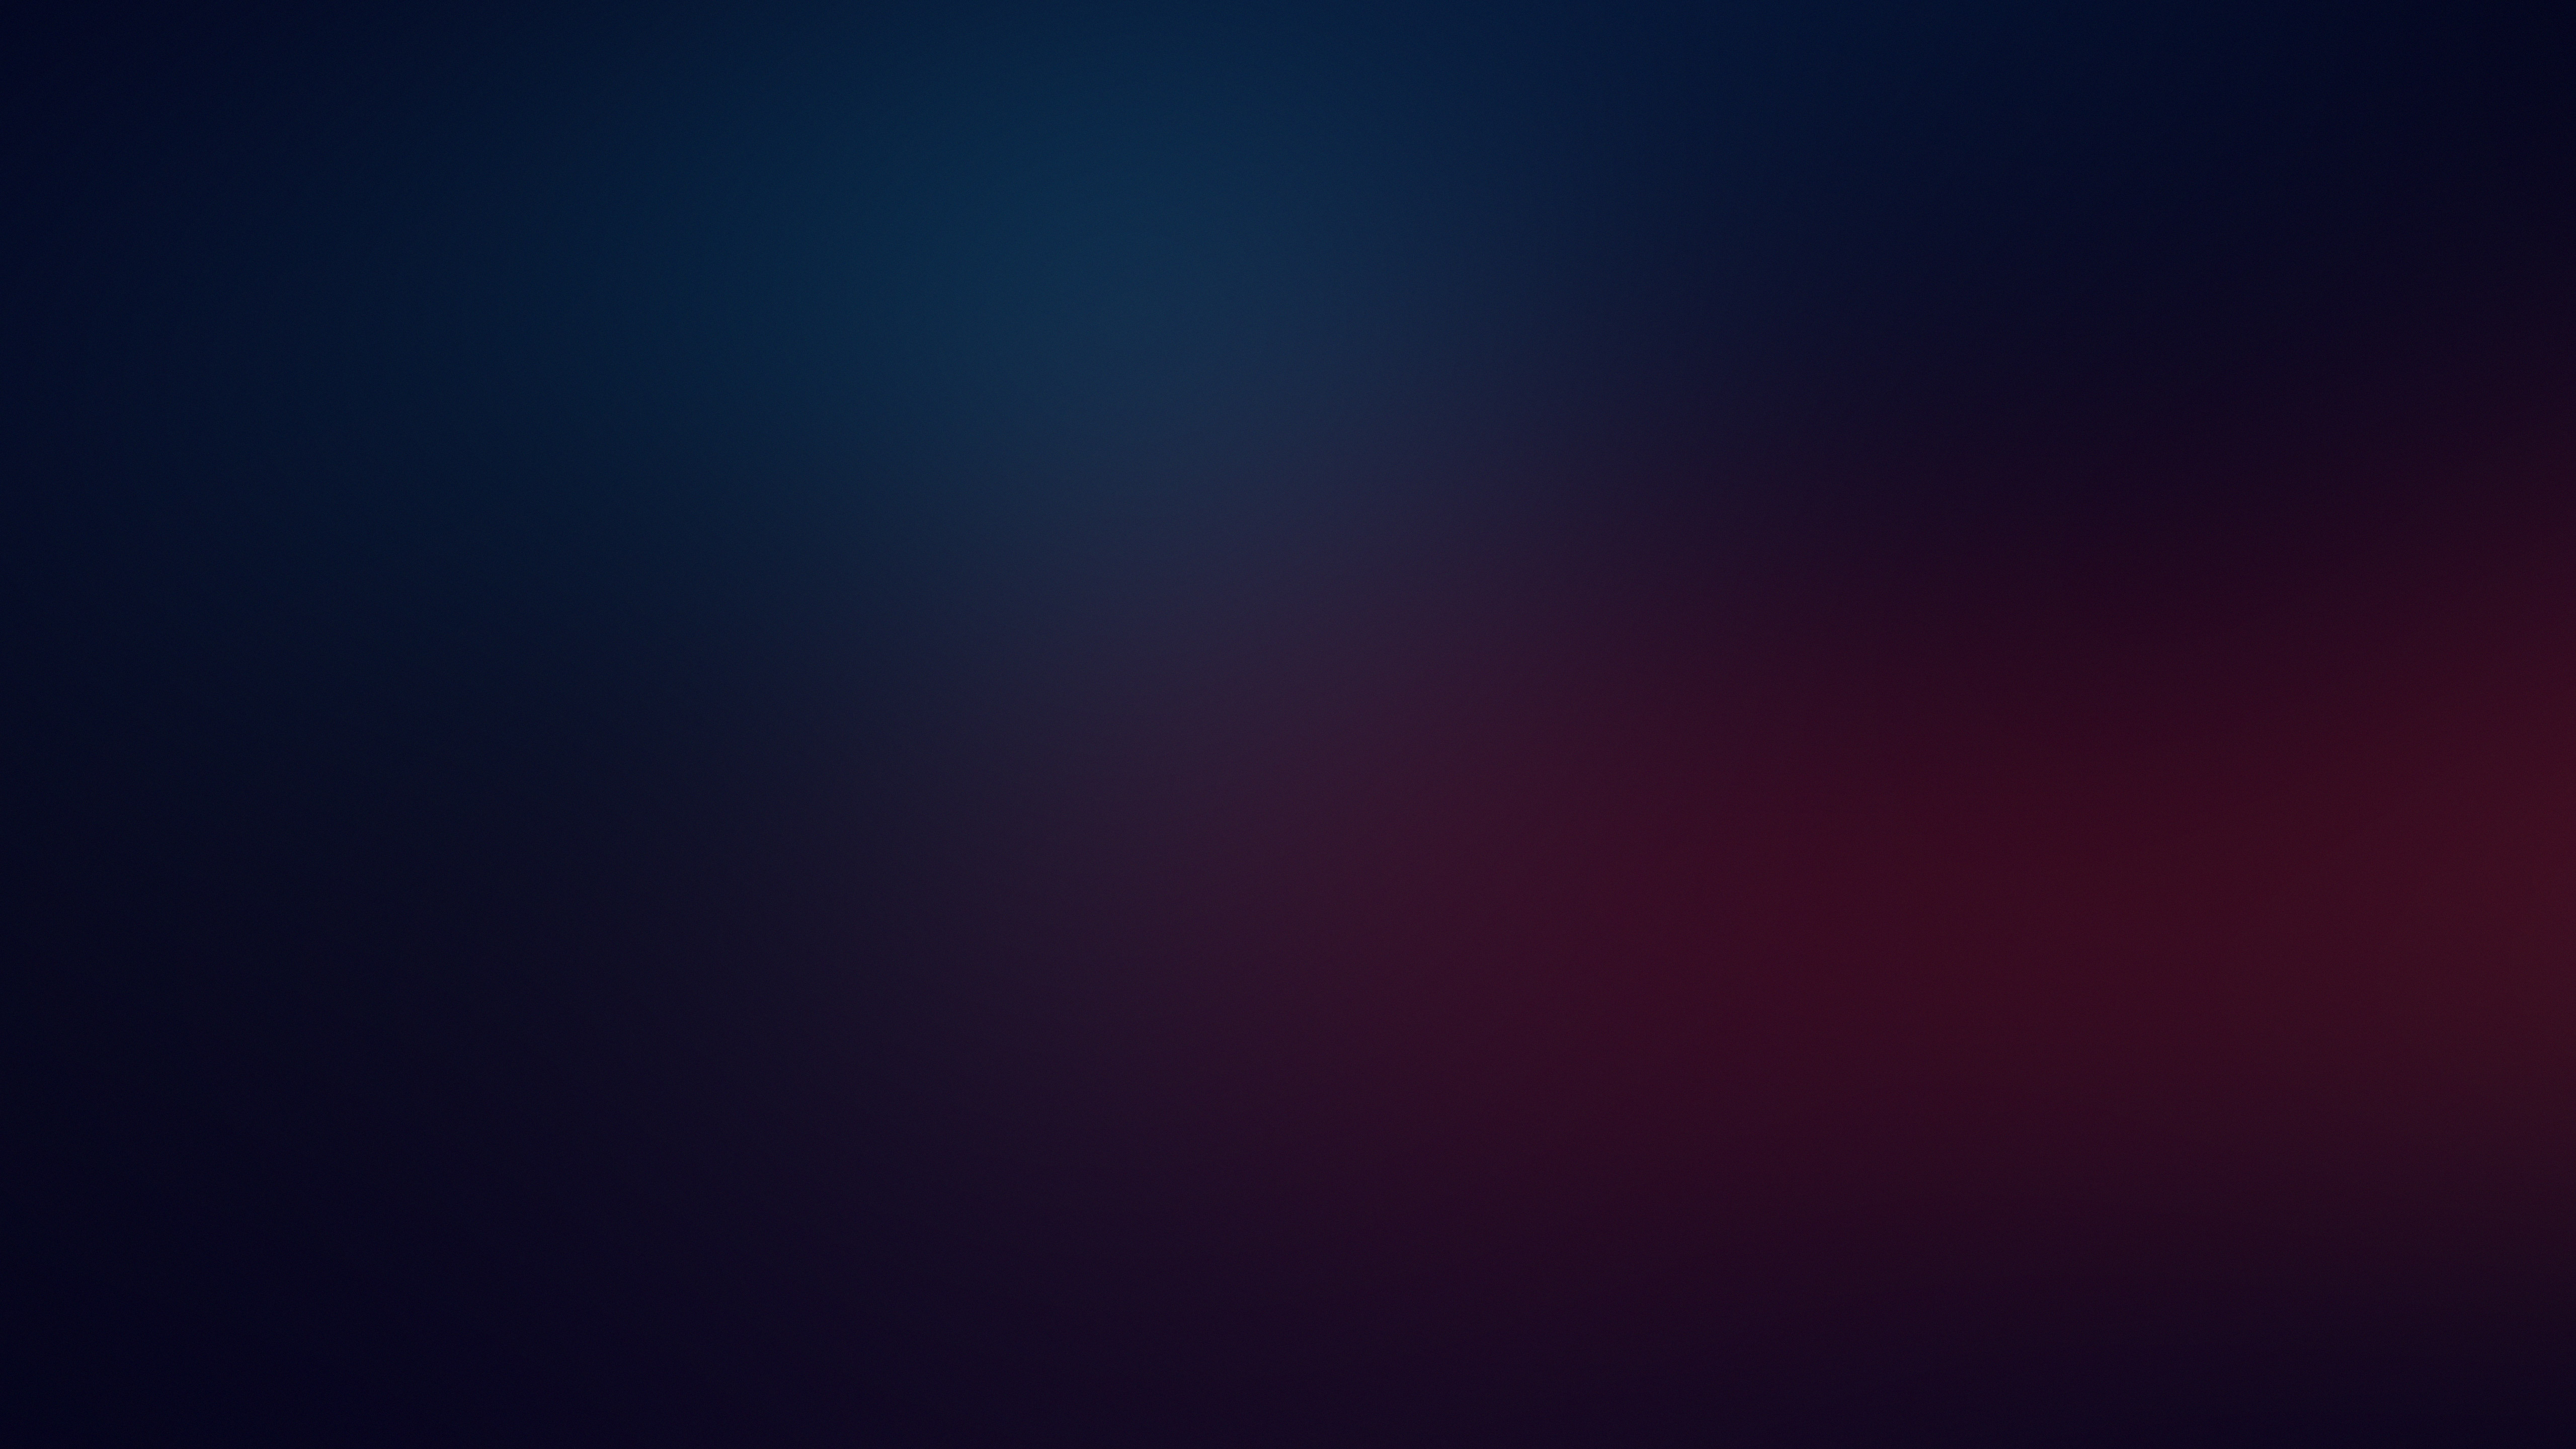 Dark Blur Abstract 4k Hd Abstract 4k Wallpapers Images Backgrounds